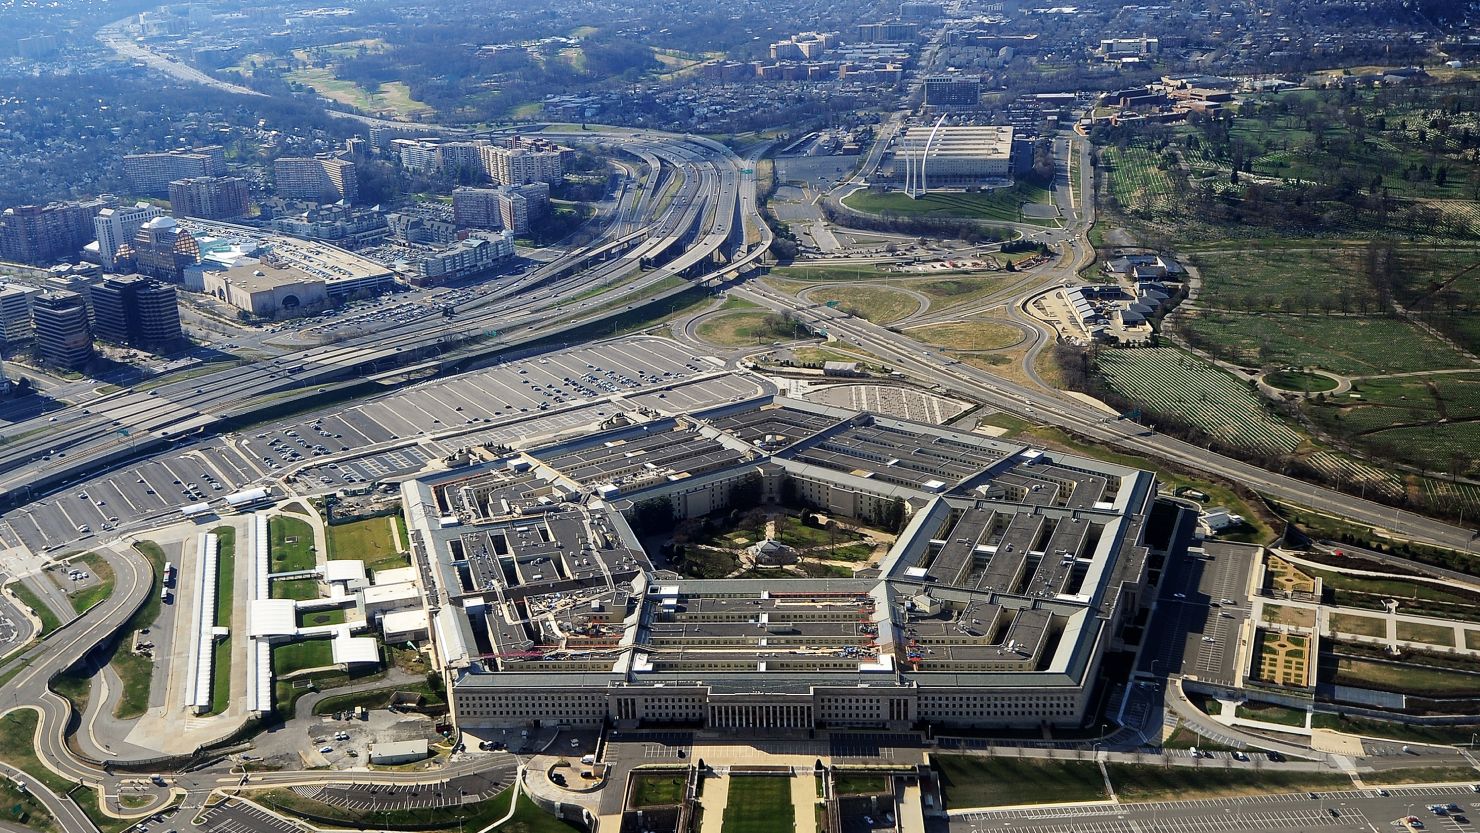 The Pentagon building is seen in Washington, DC, on December 26, 2011.